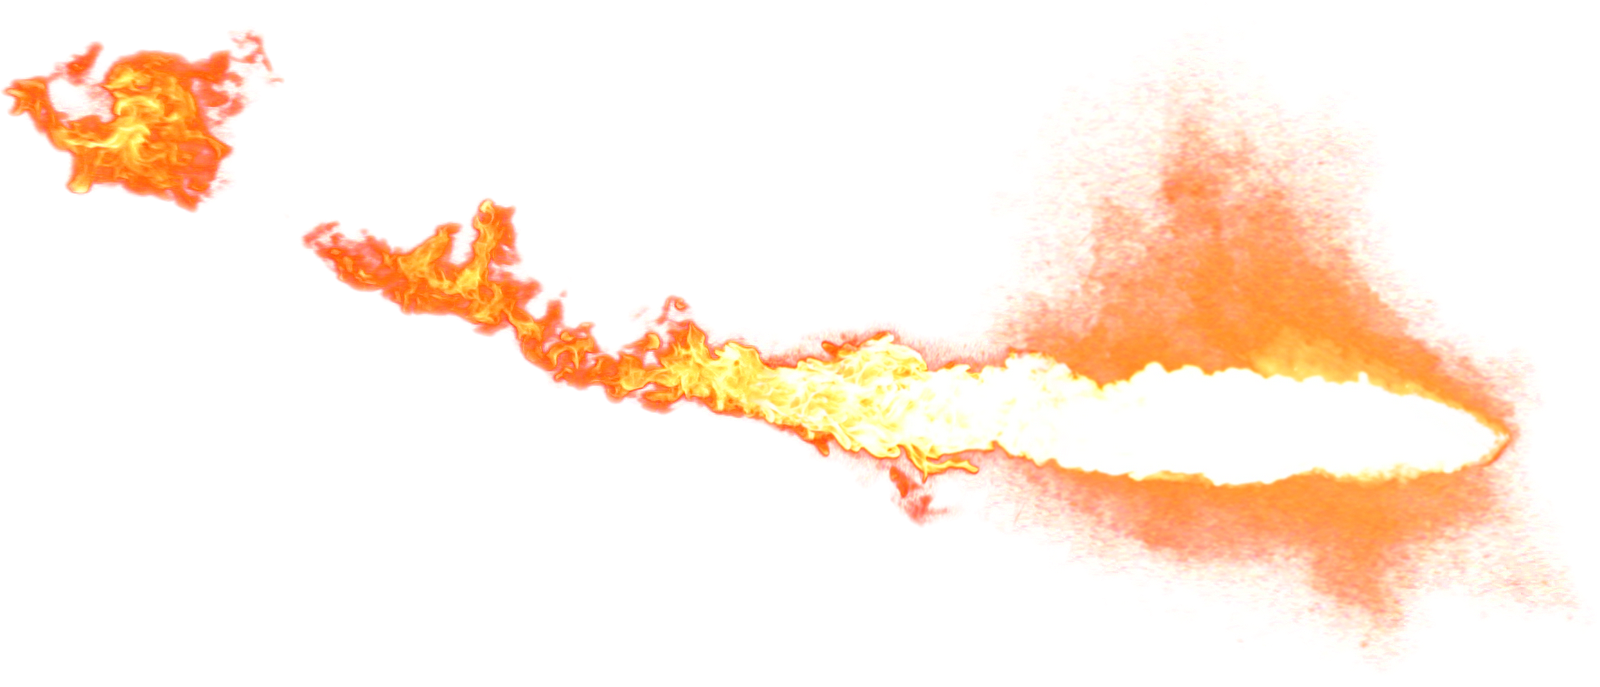 Fireball Free Download PNG Image